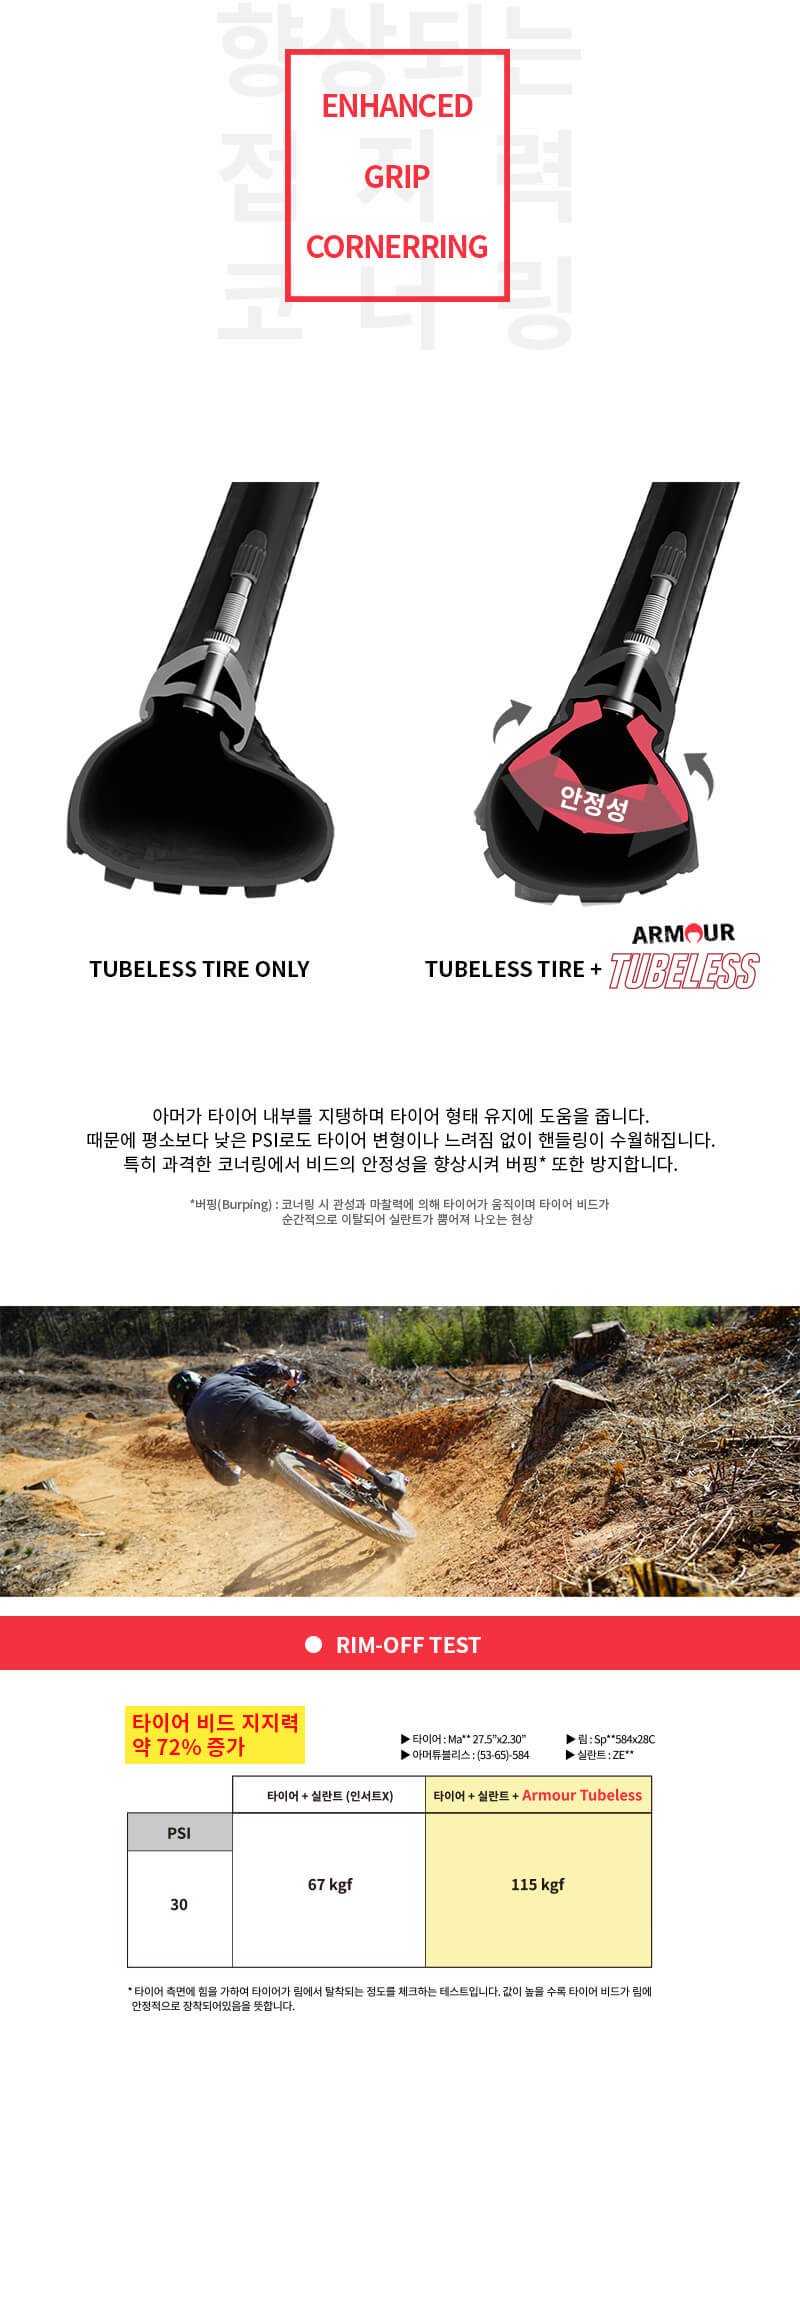 armour-tubeless_product_04